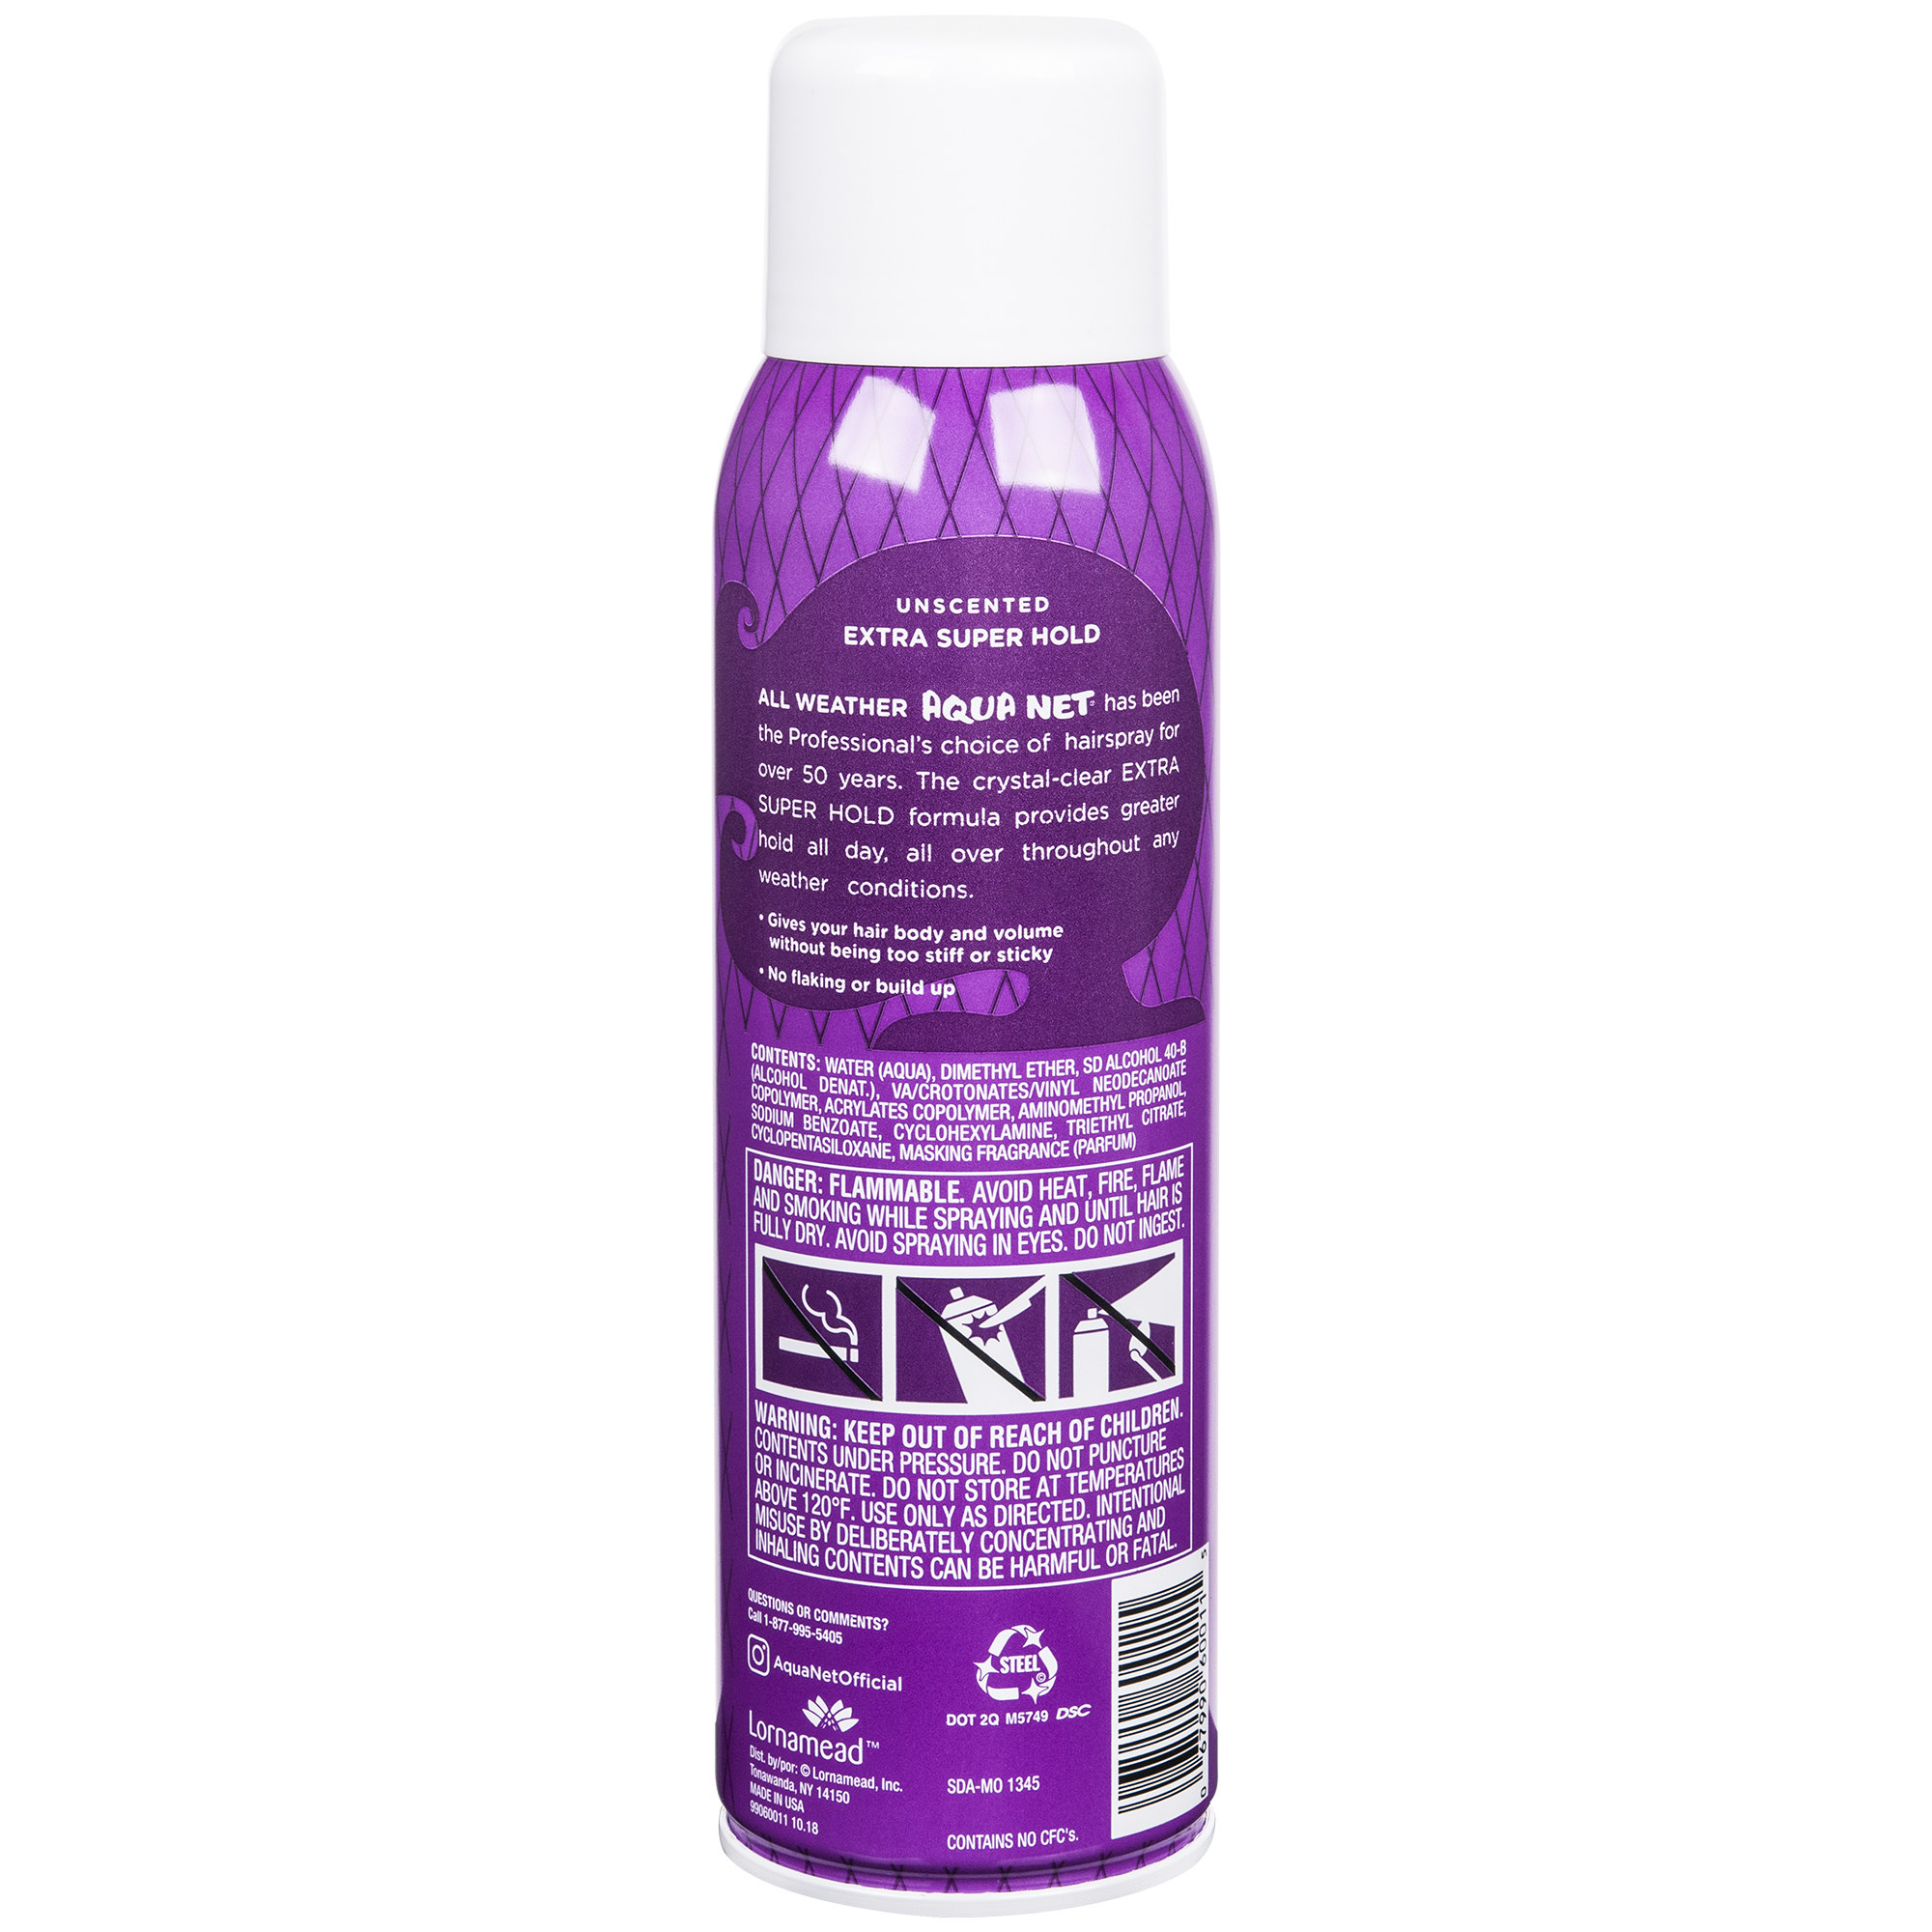 Aqua Net Hairspray, Extra Super Hold, Unscented, 11 oz Aerosol Can - image 2 of 8